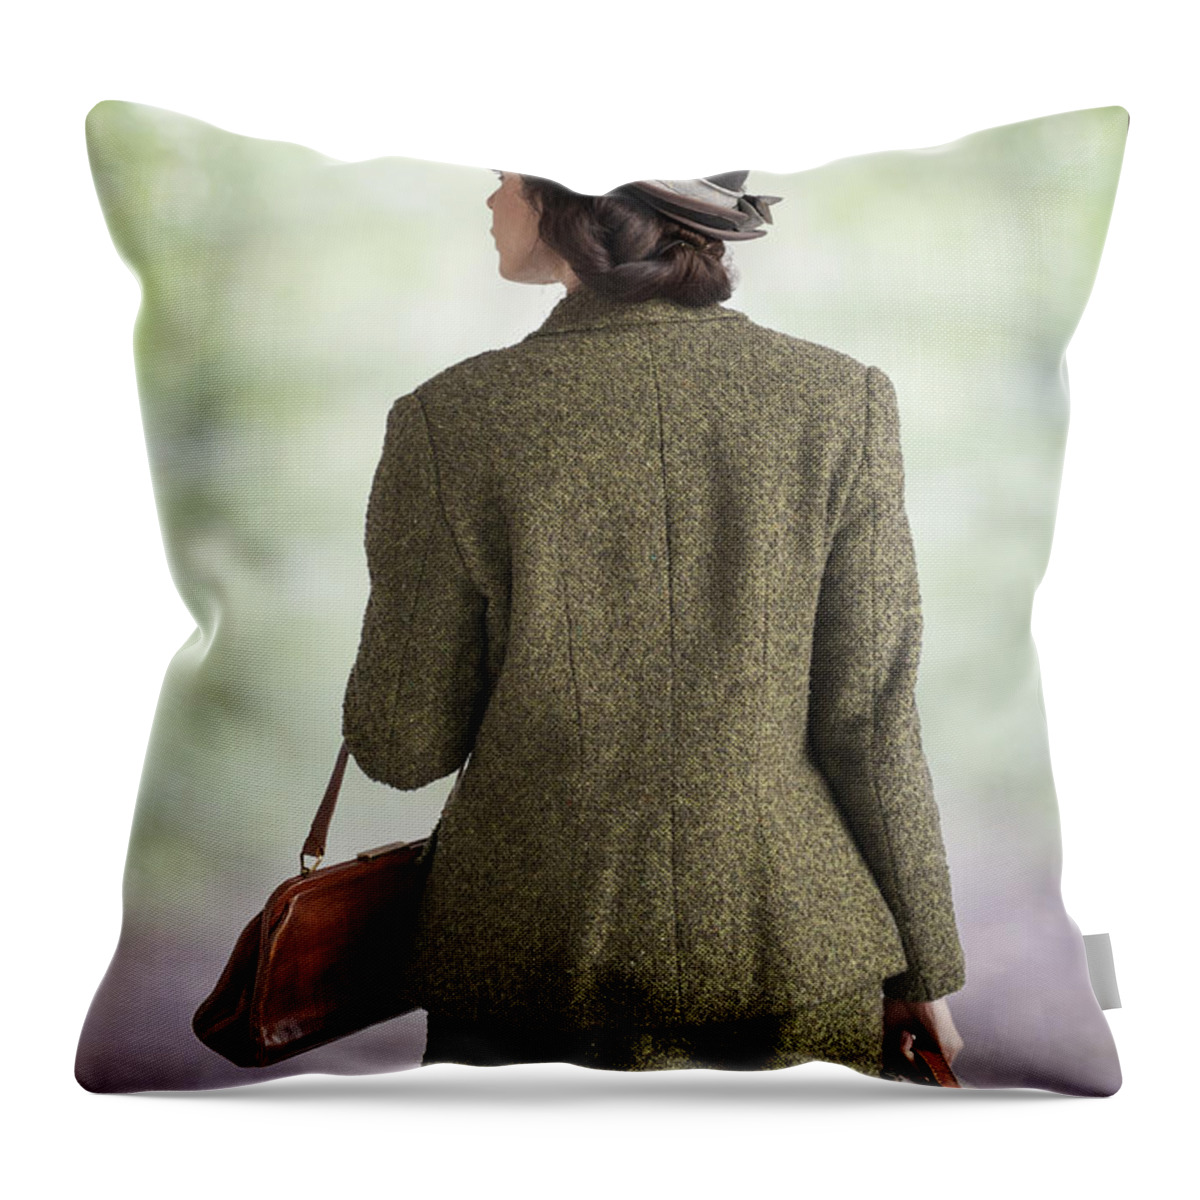 1940s Throw Pillow featuring the photograph 1940s Woman Walking With Leather Suitcase And Handbag by Lee Avison